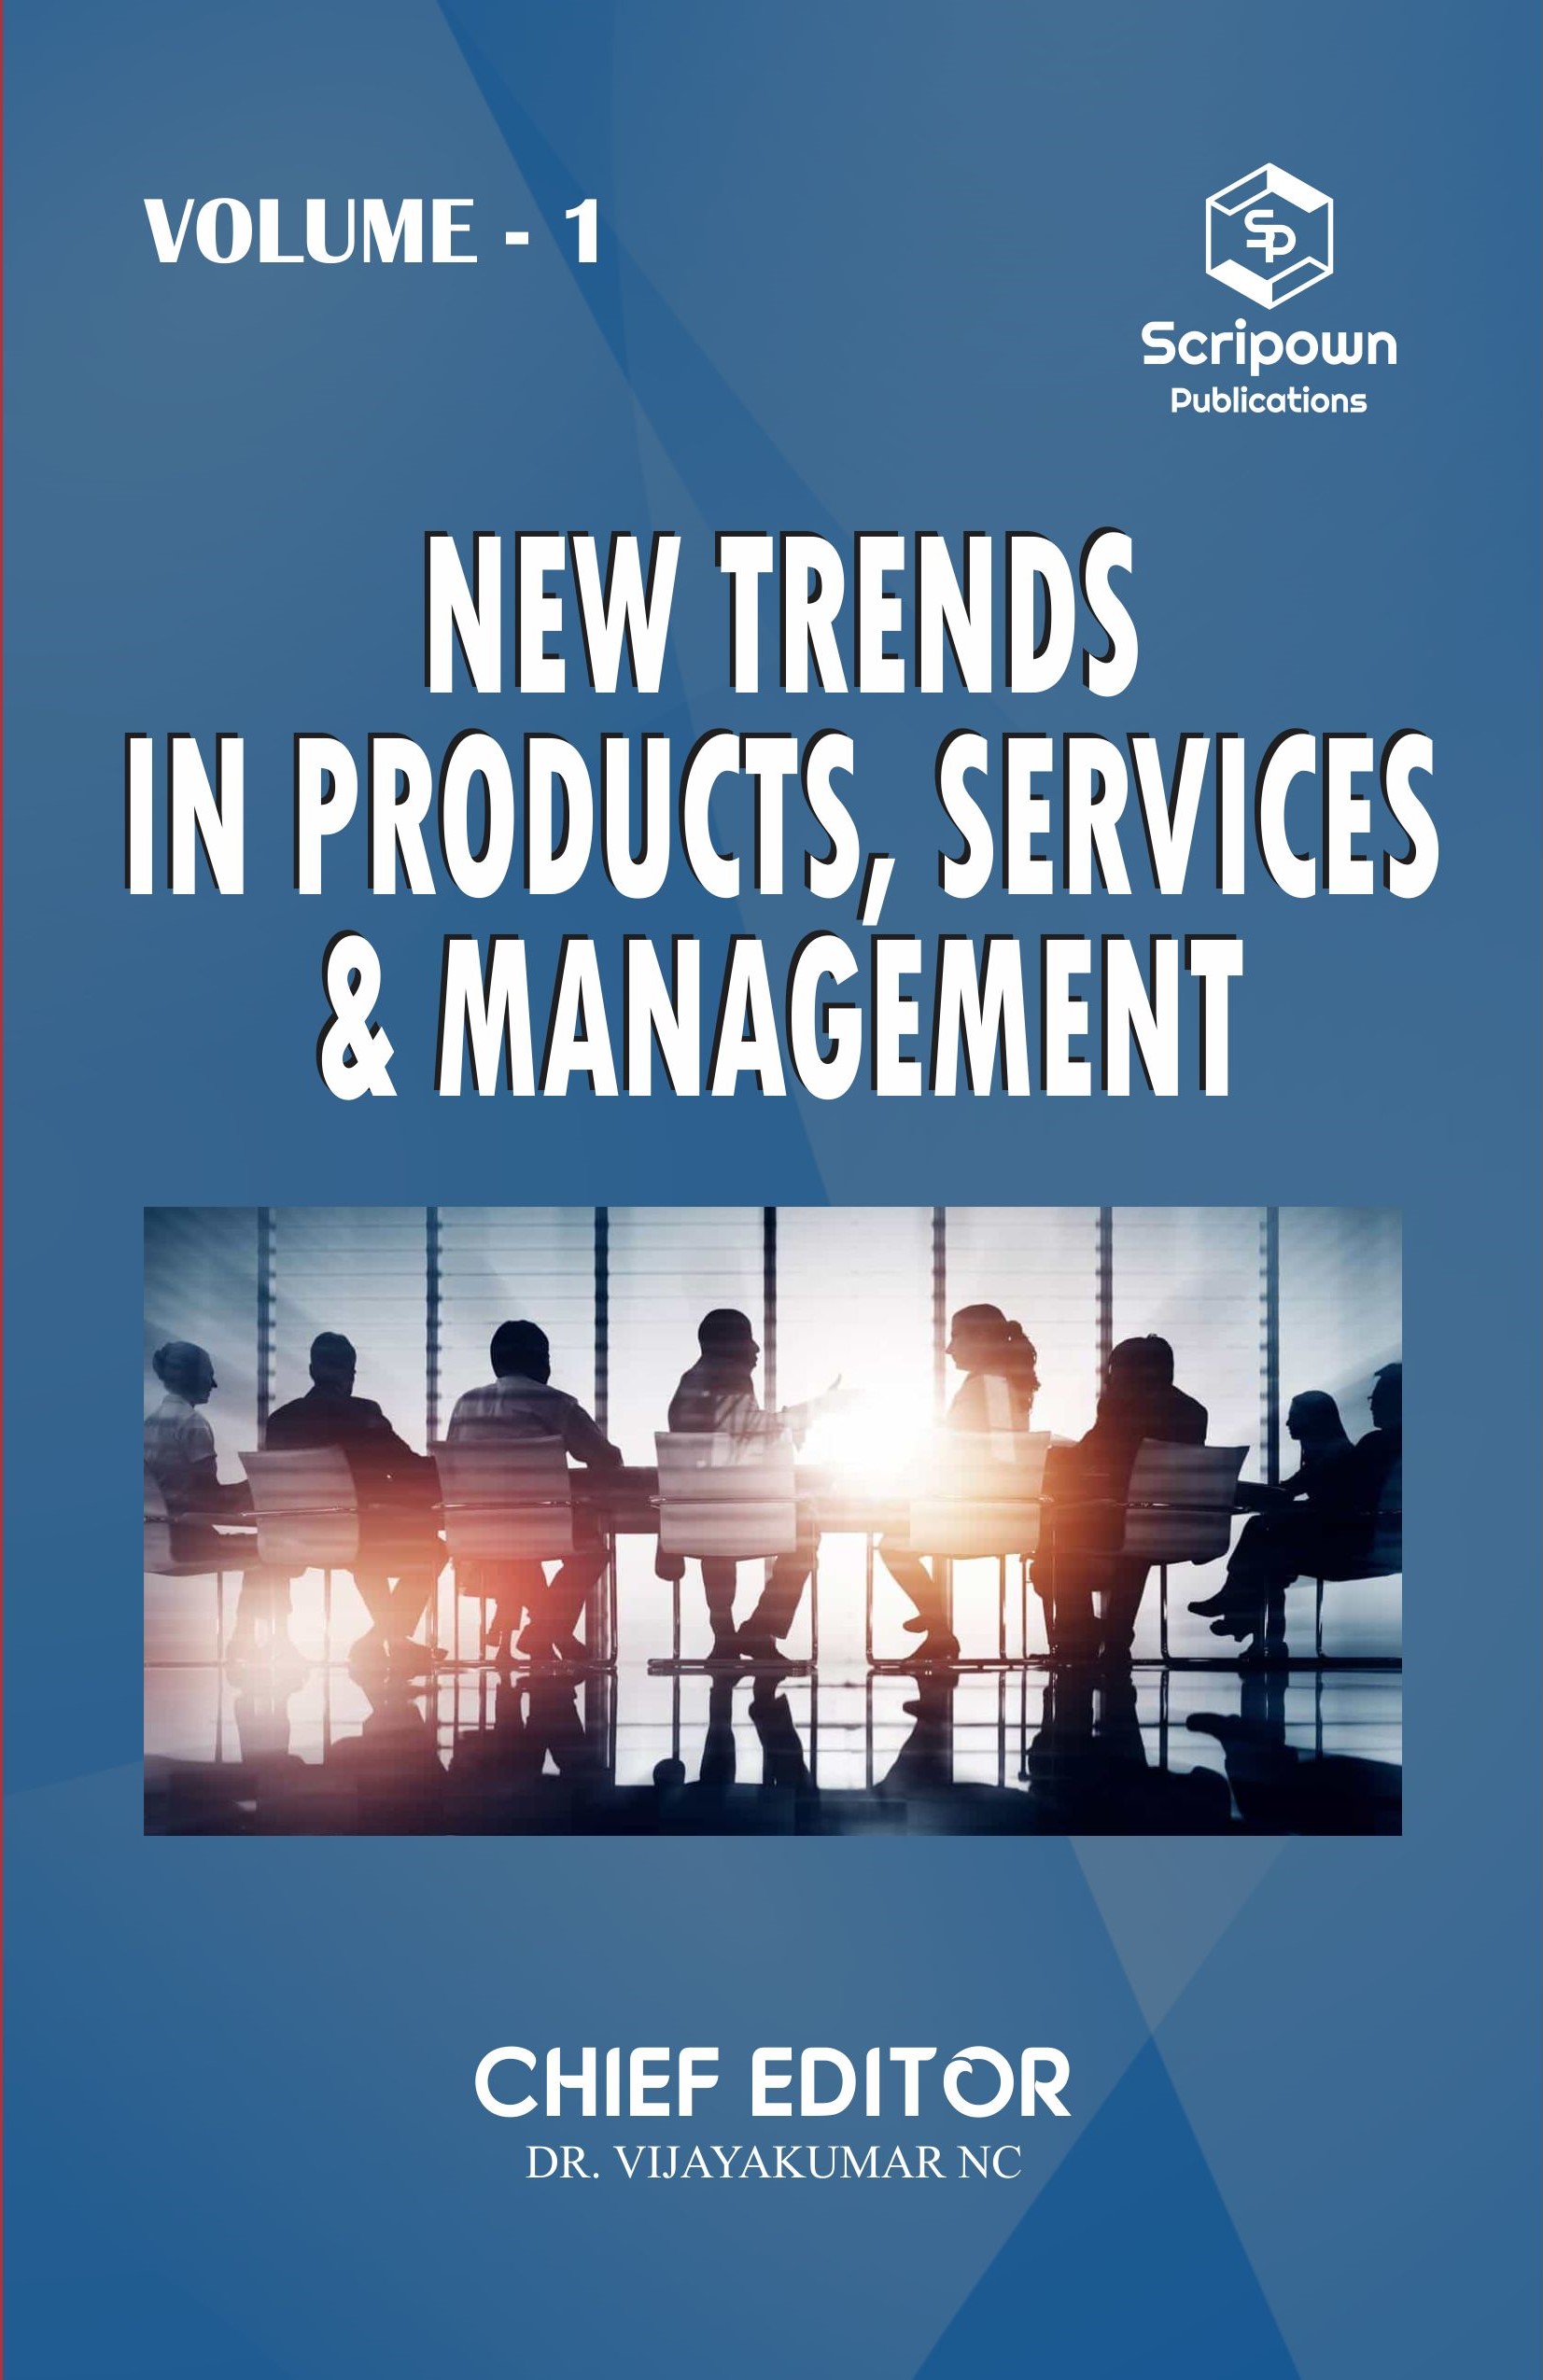 New Trends in Products, Services & Management (Volume - 1)